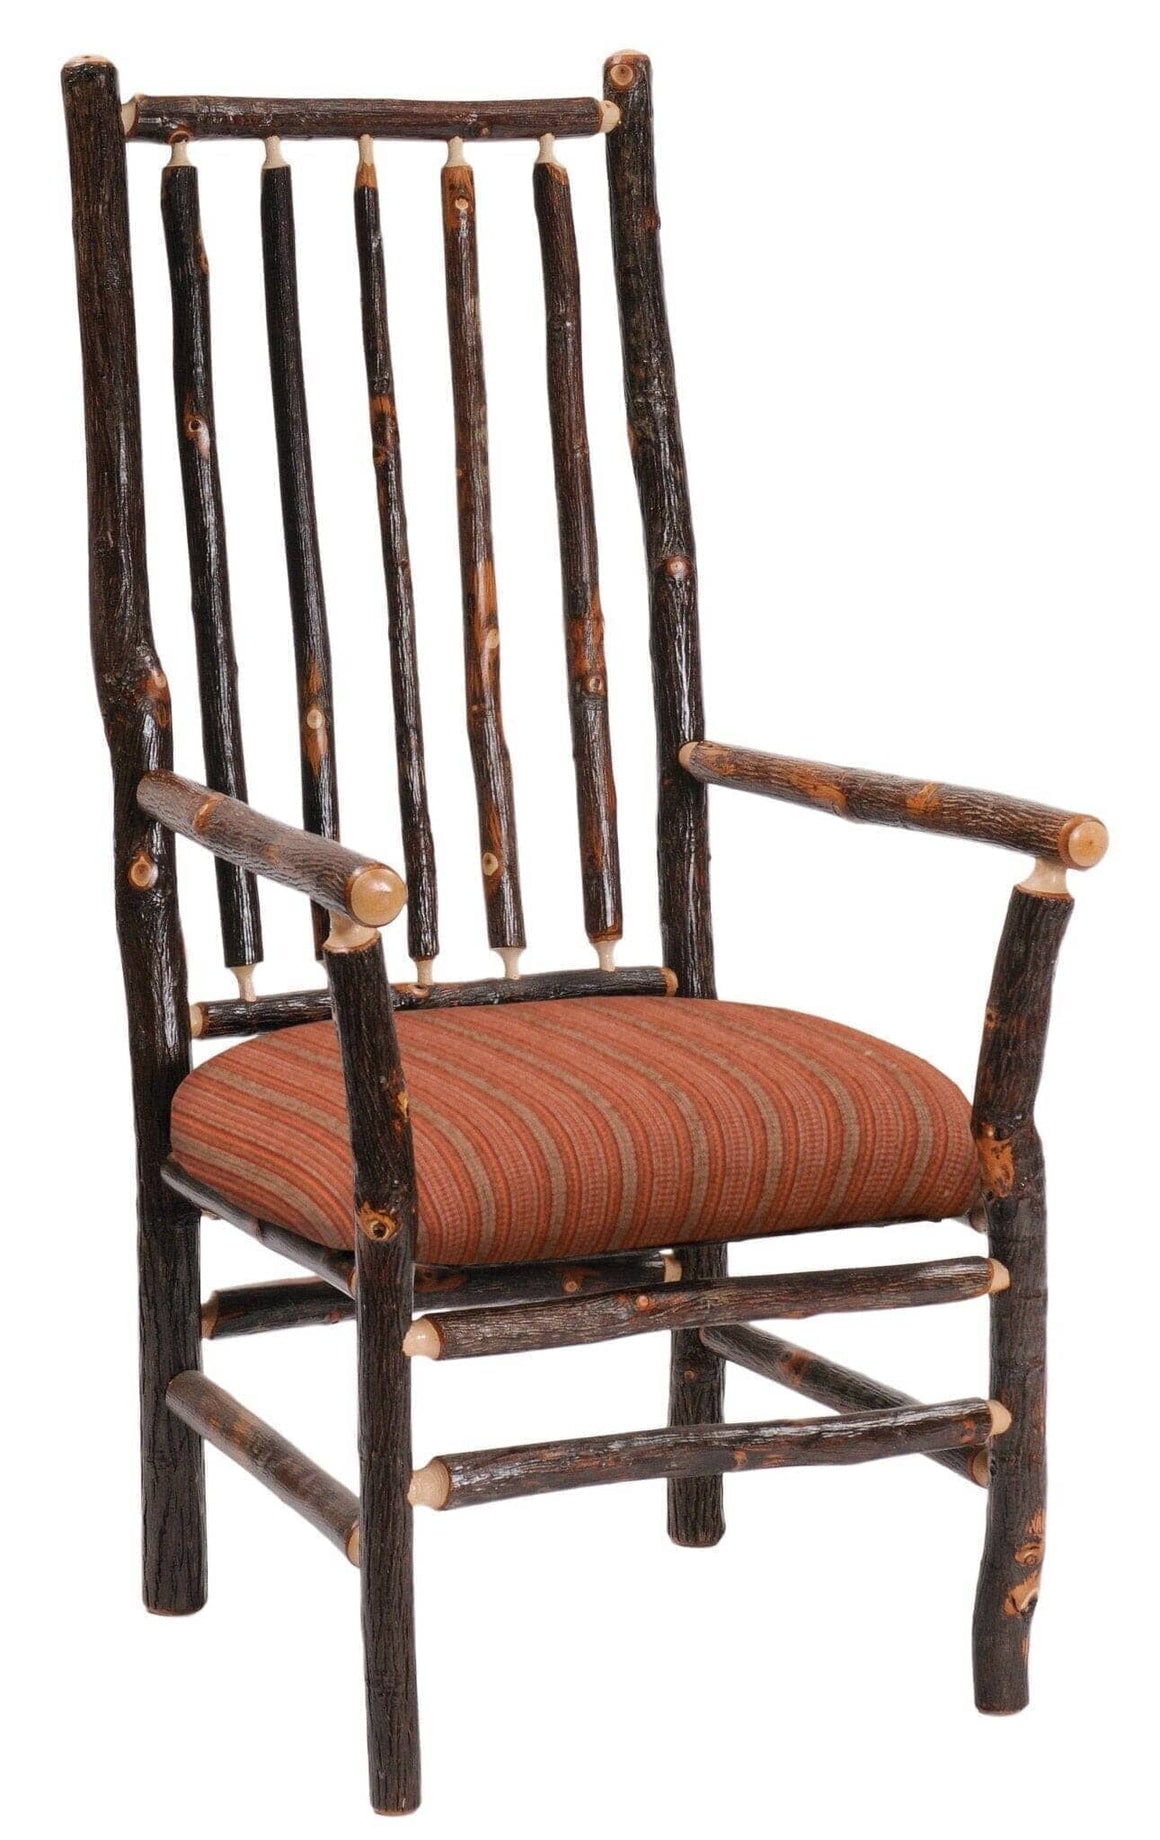 Natural Hickory Log High-back Spoke Arm Chair - Upholstered Seat - Rustic Deco Incorporated